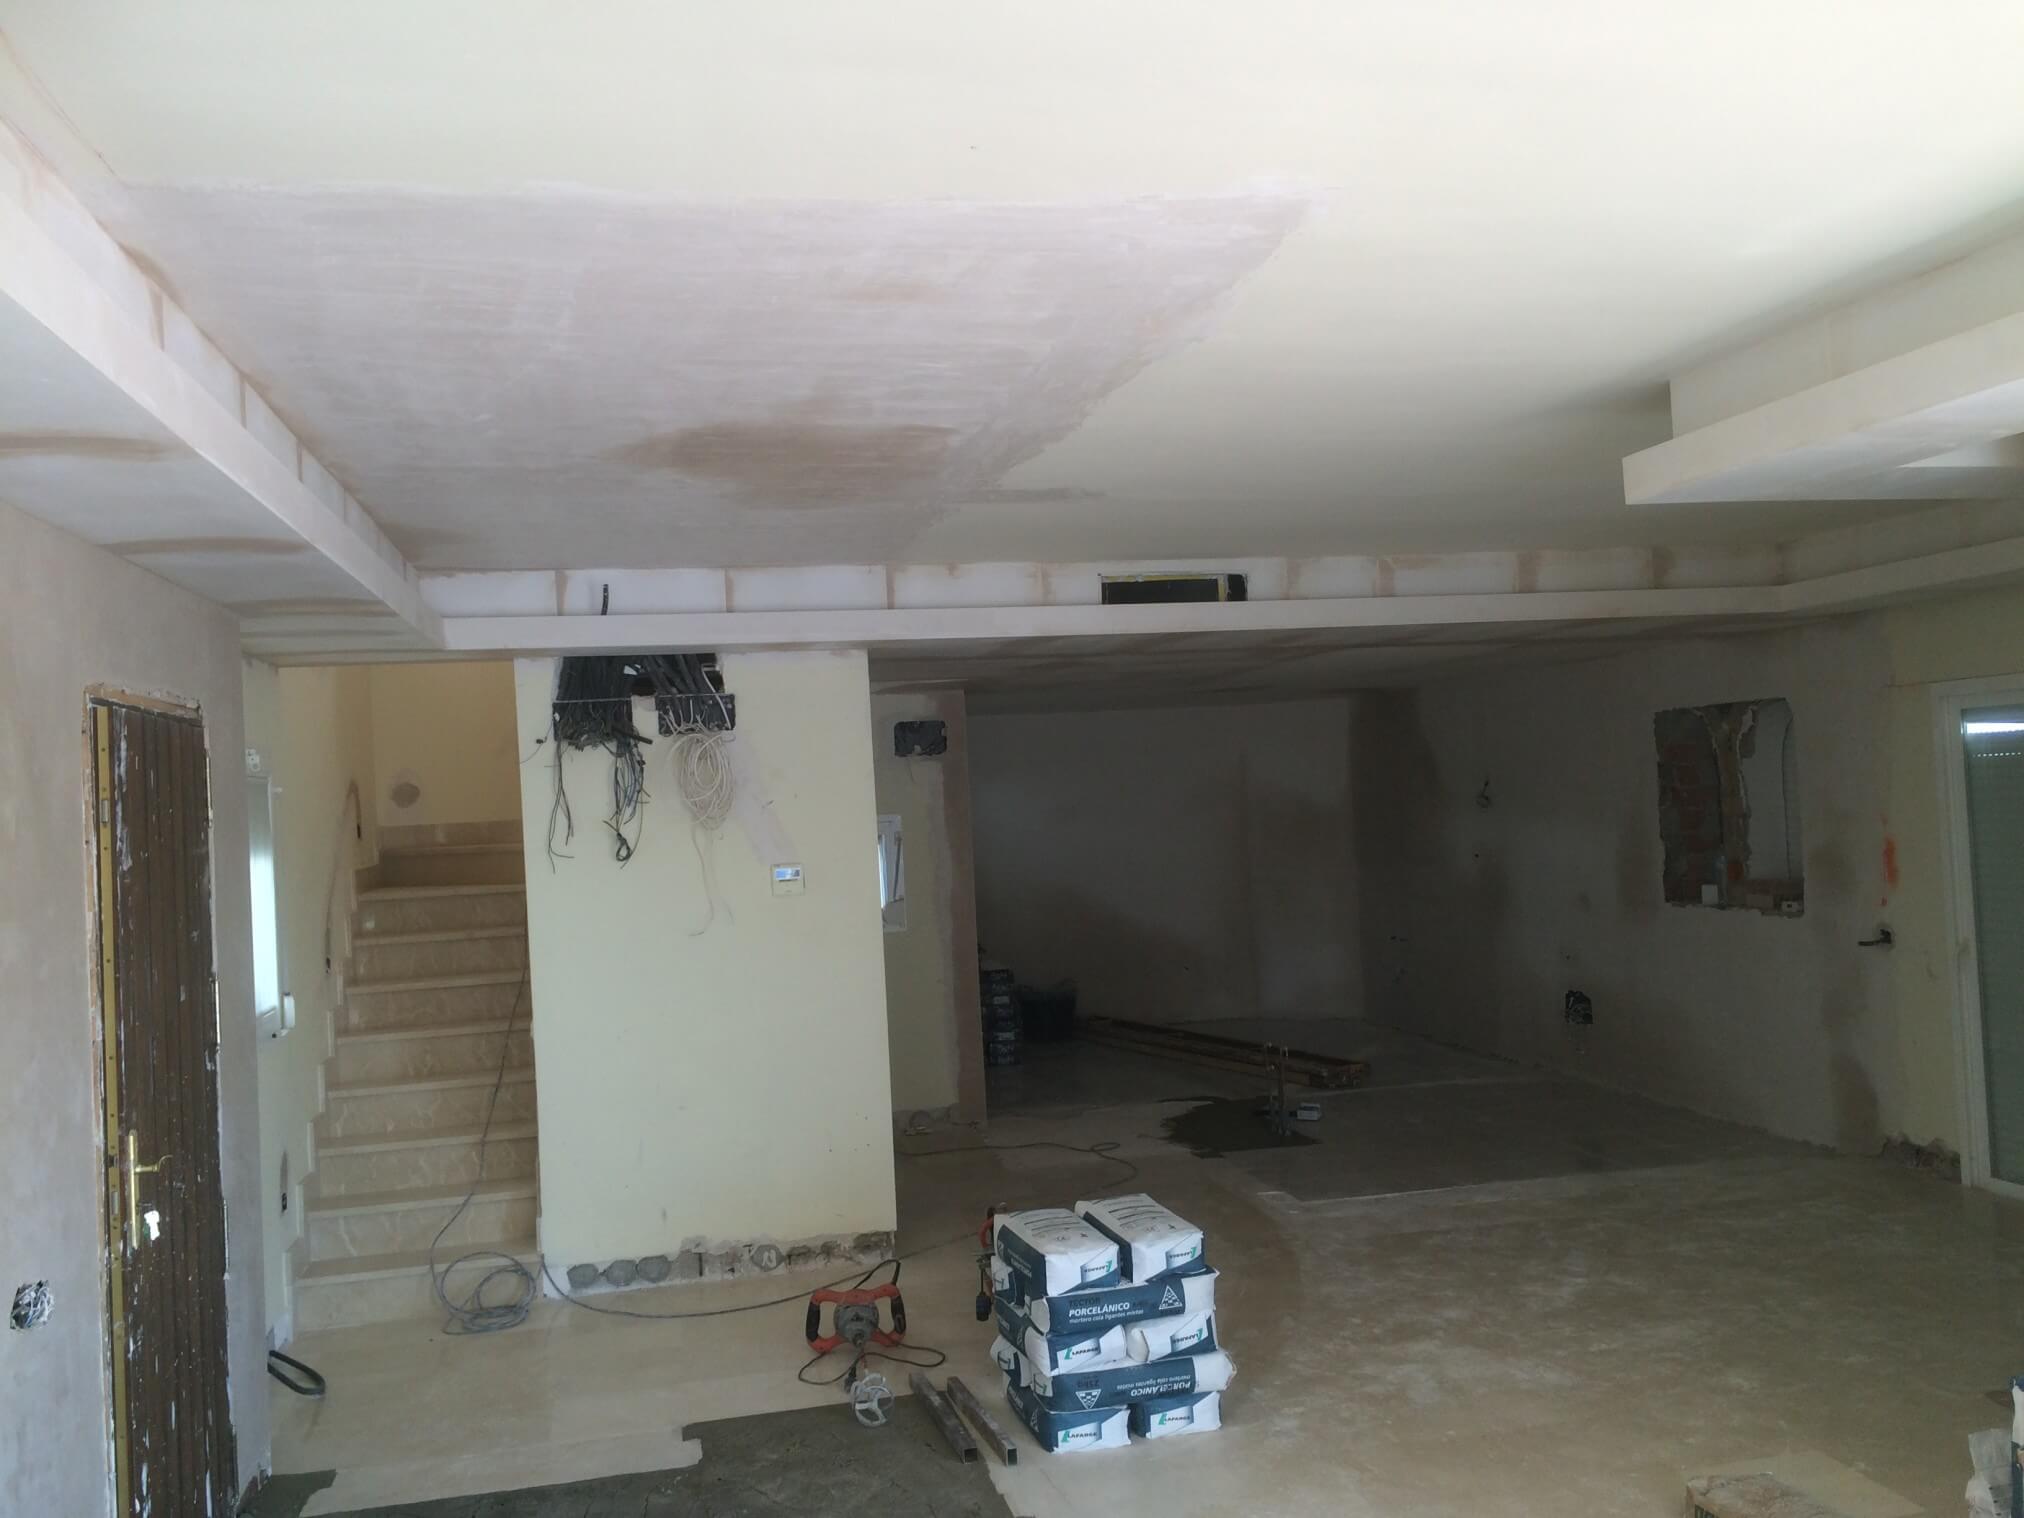 Plastering the wools and ceilings